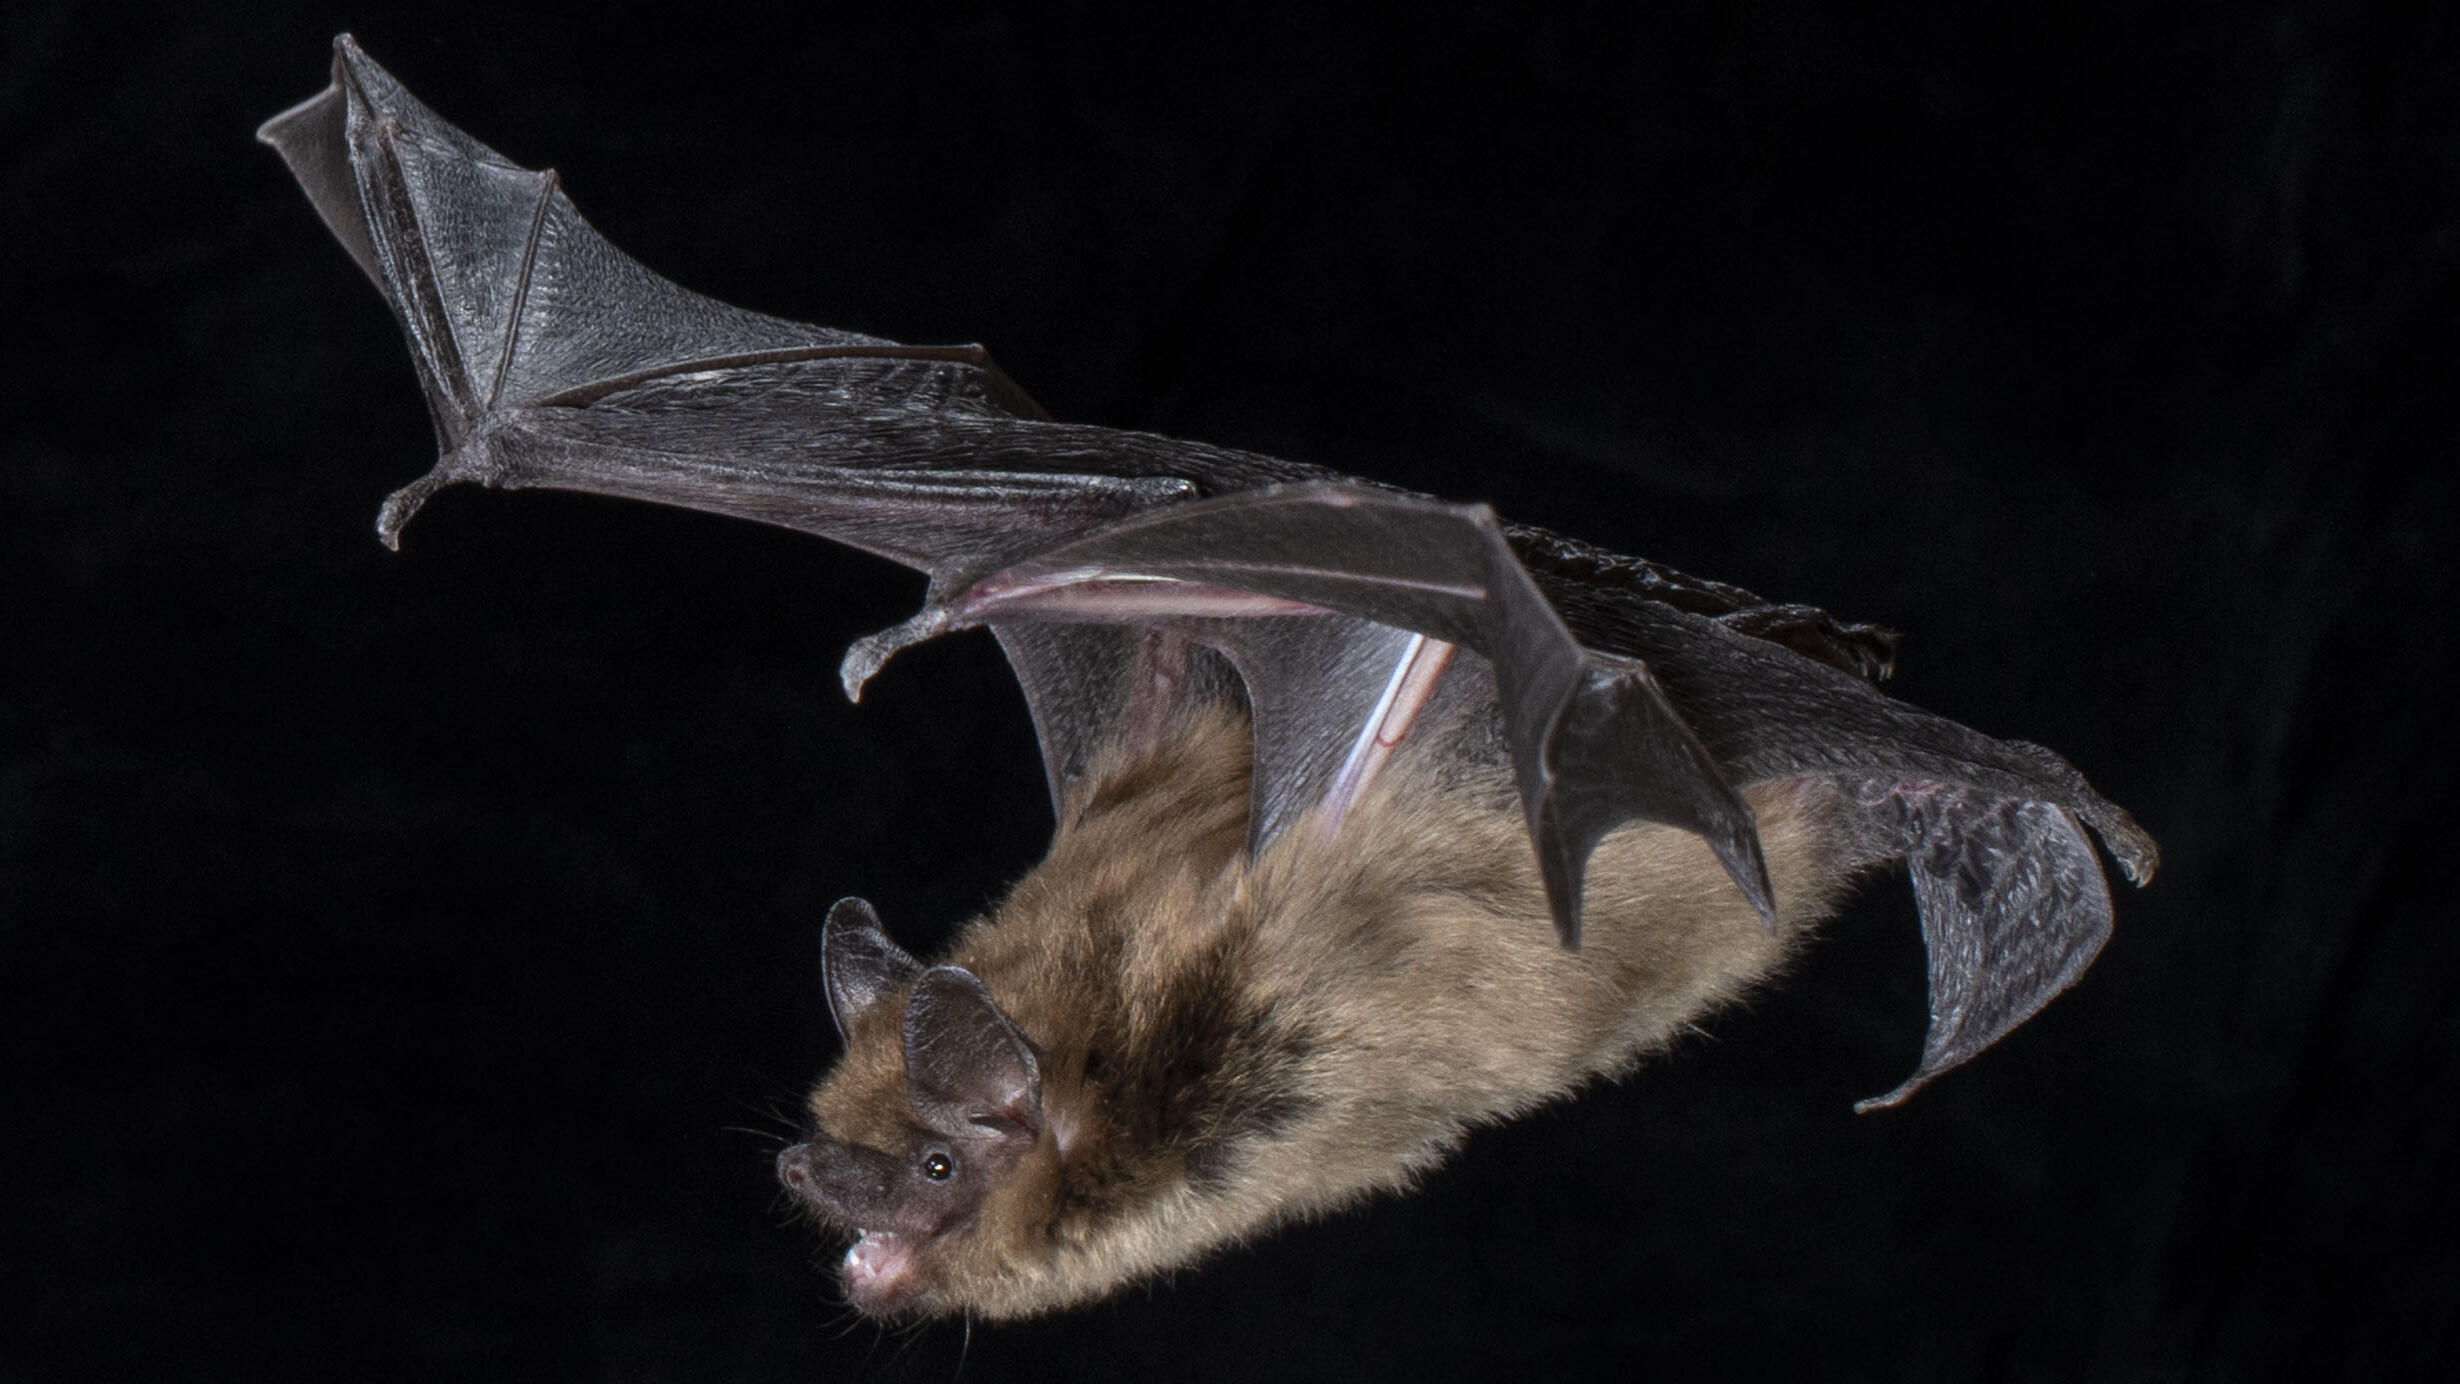 A bat with wings spread swoops through the air.